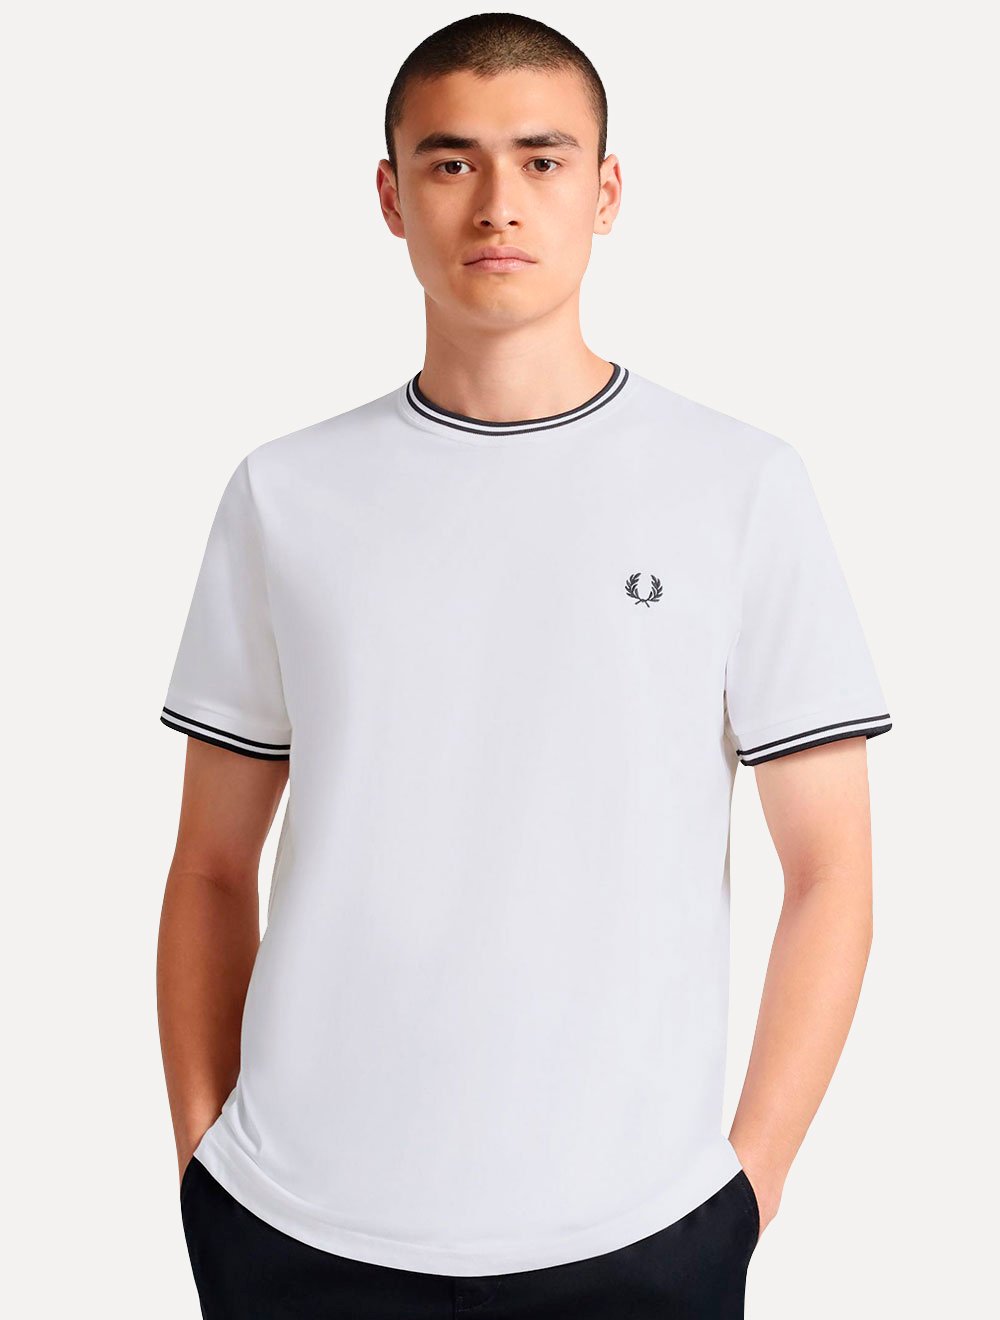 Camiseta Fred Perry Masculina Regular Twin Tipped Branca